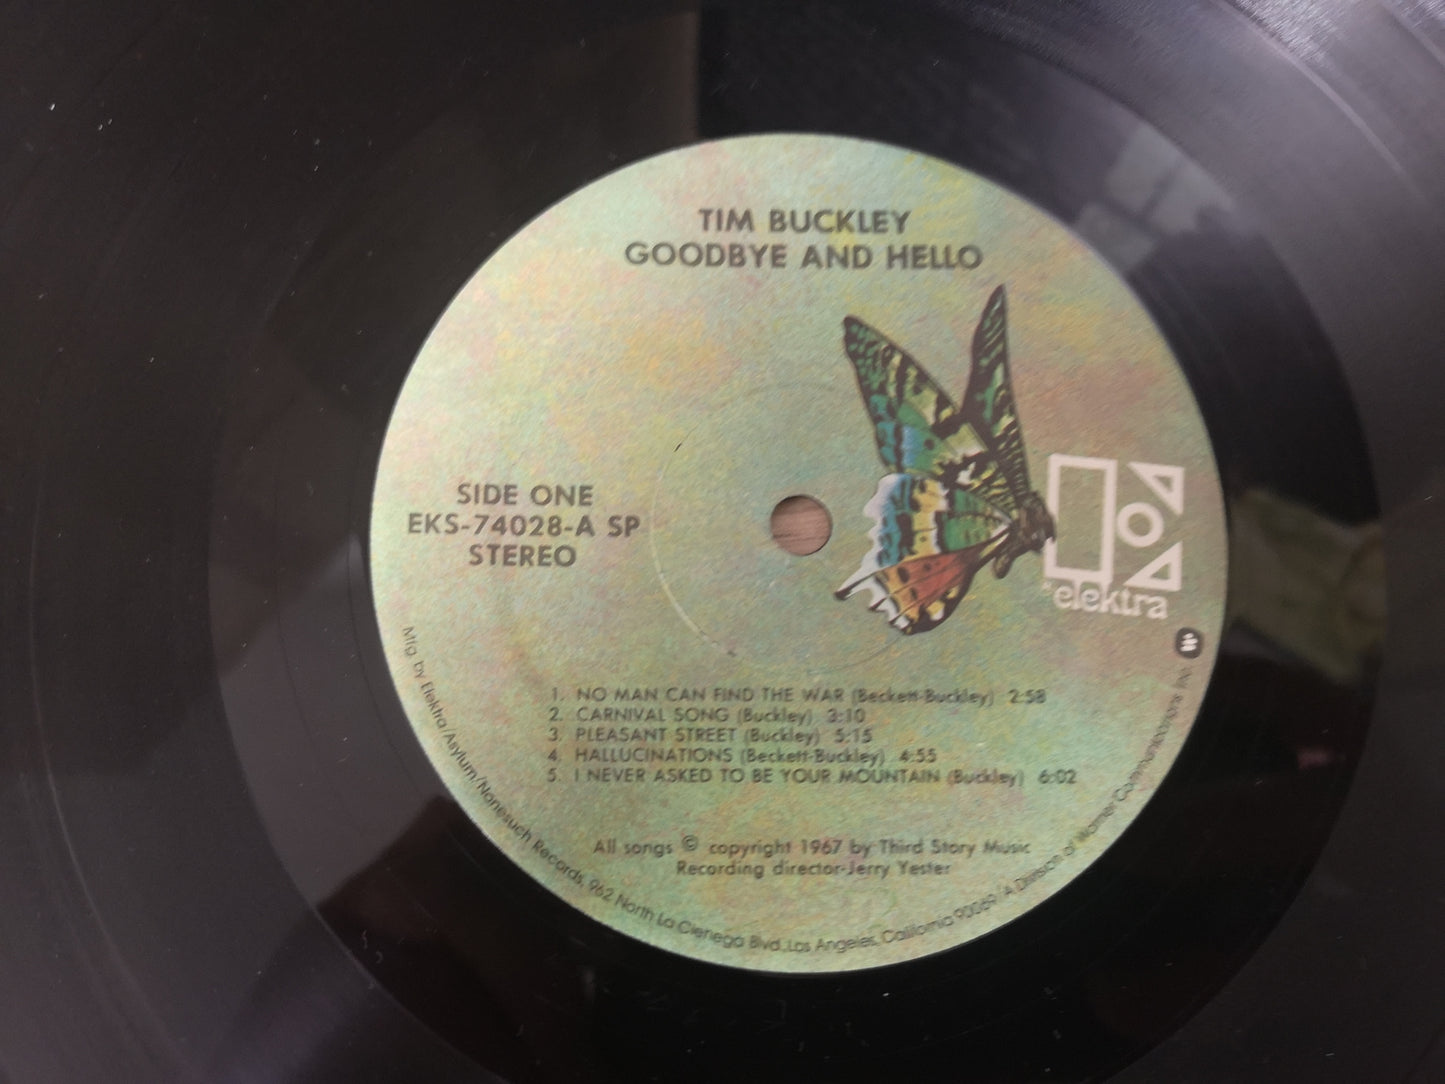 Tim Buckley "Goodbye and Hello" (Re 1973) US VG++/EX